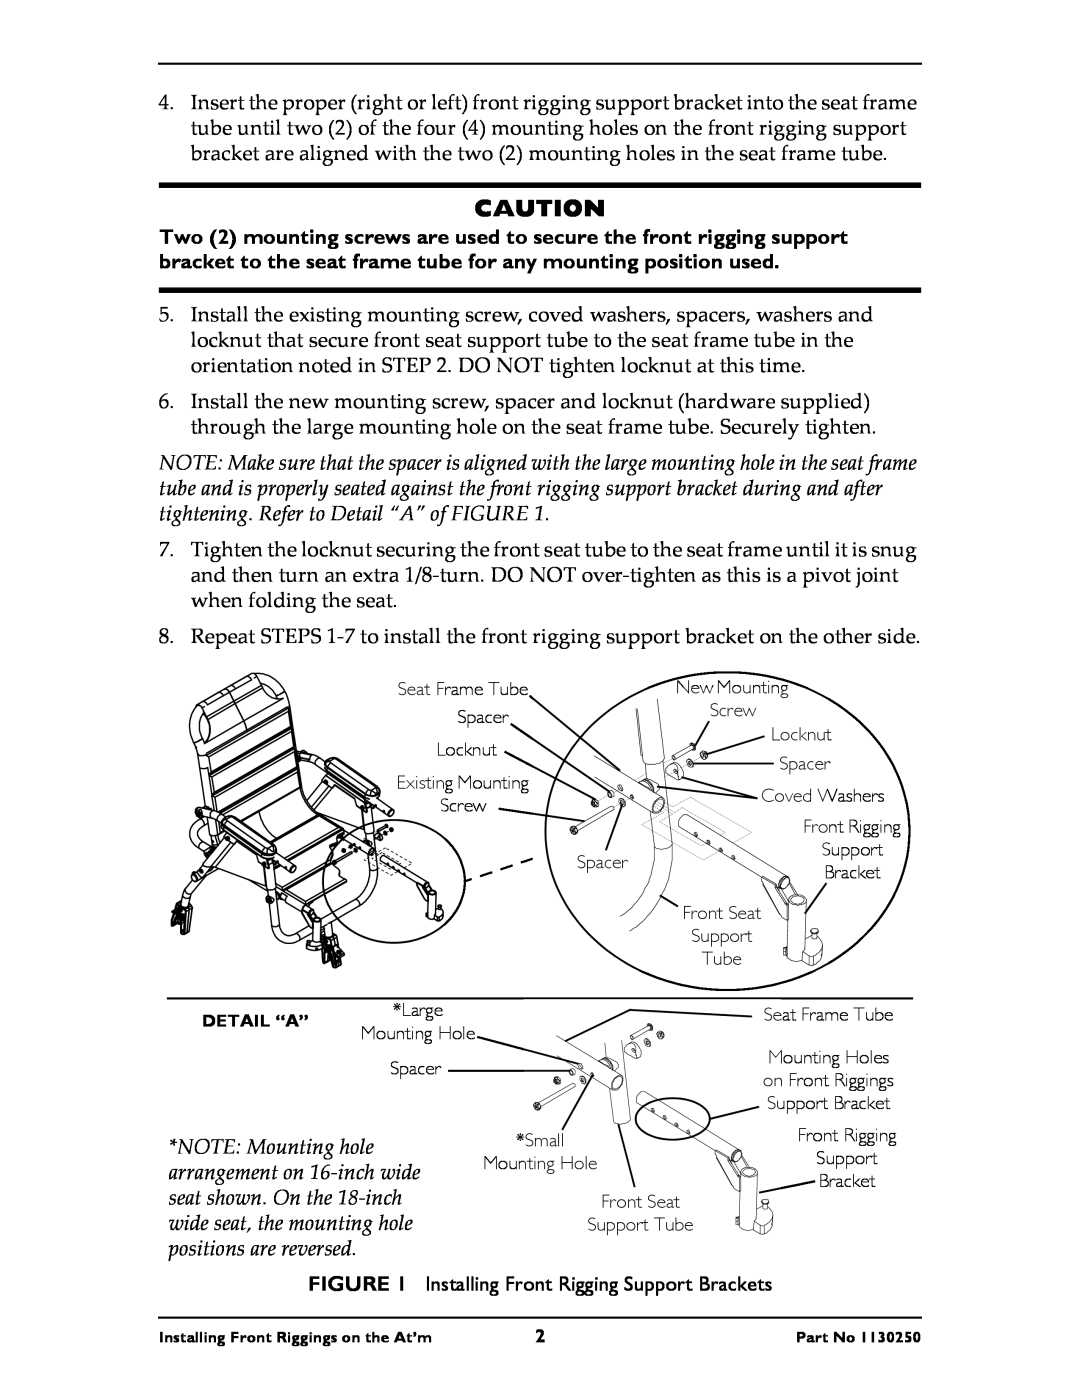 Invacare 9153644014, 9153644018 operating instructions Installing Front Rigging Support Brackets, Coved Washers 